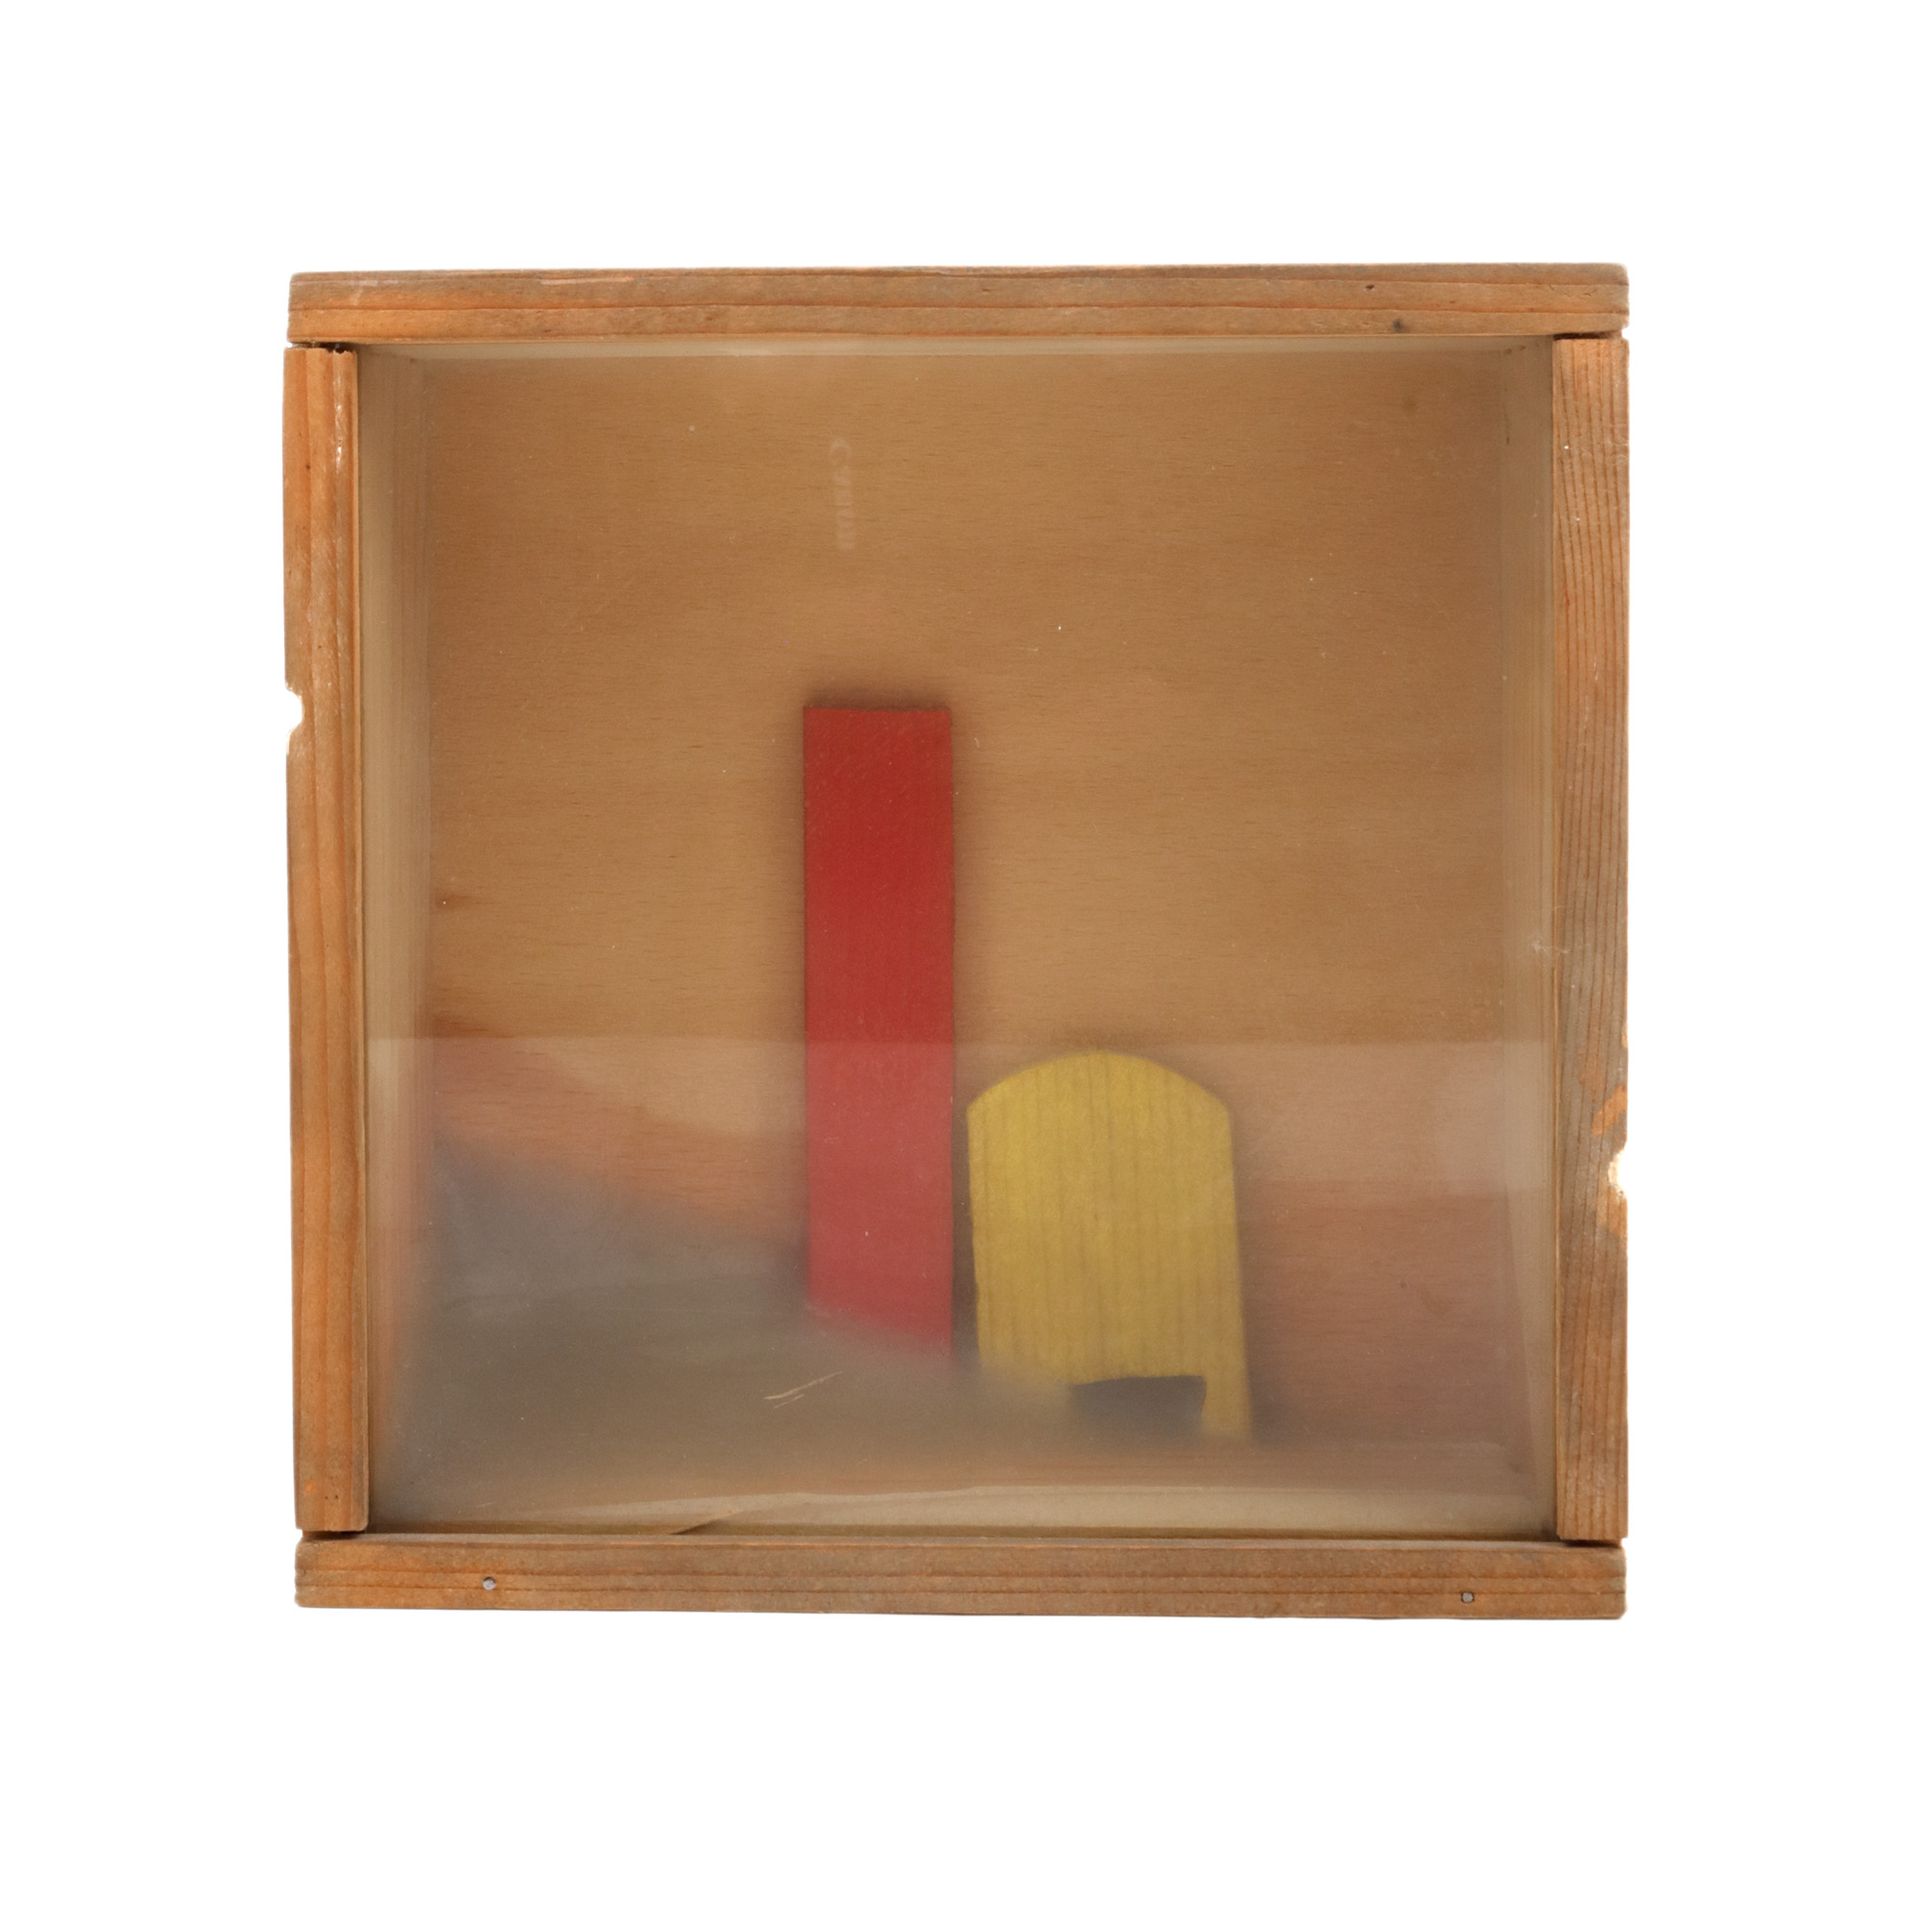 Ion Bițan, Trace [from the Image Generator series] wood and wax, 16.5 x 16.5, si&hellip;